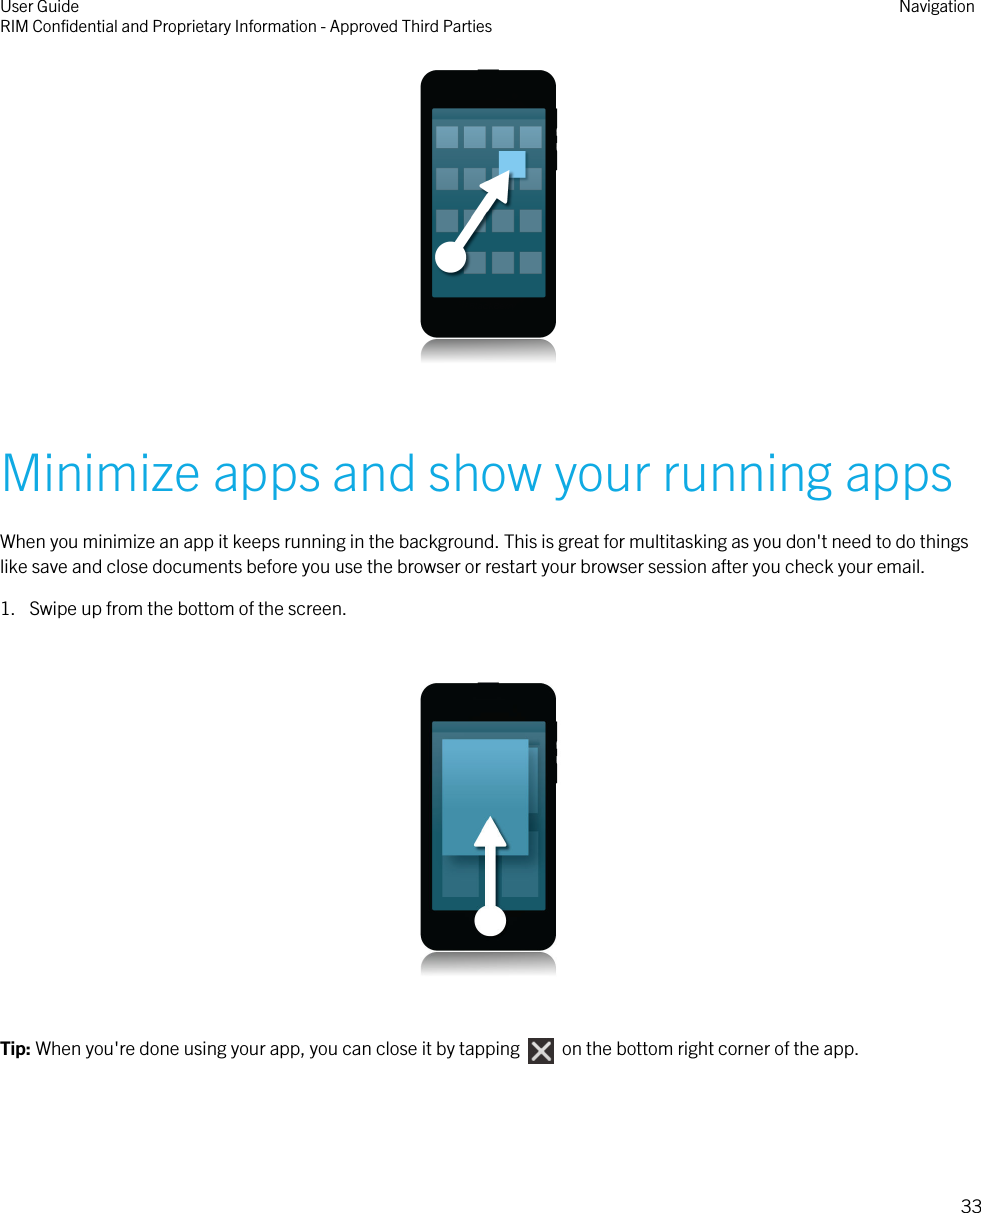  Minimize apps and show your running appsWhen you minimize an app it keeps running in the background. This is great for multitasking as you don&apos;t need to do thingslike save and close documents before you use the browser or restart your browser session after you check your email.1. Swipe up from the bottom of the screen.  Tip: When you&apos;re done using your app, you can close it by tapping    on the bottom right corner of the app.User GuideRIM Confidential and Proprietary Information - Approved Third Parties Navigation33